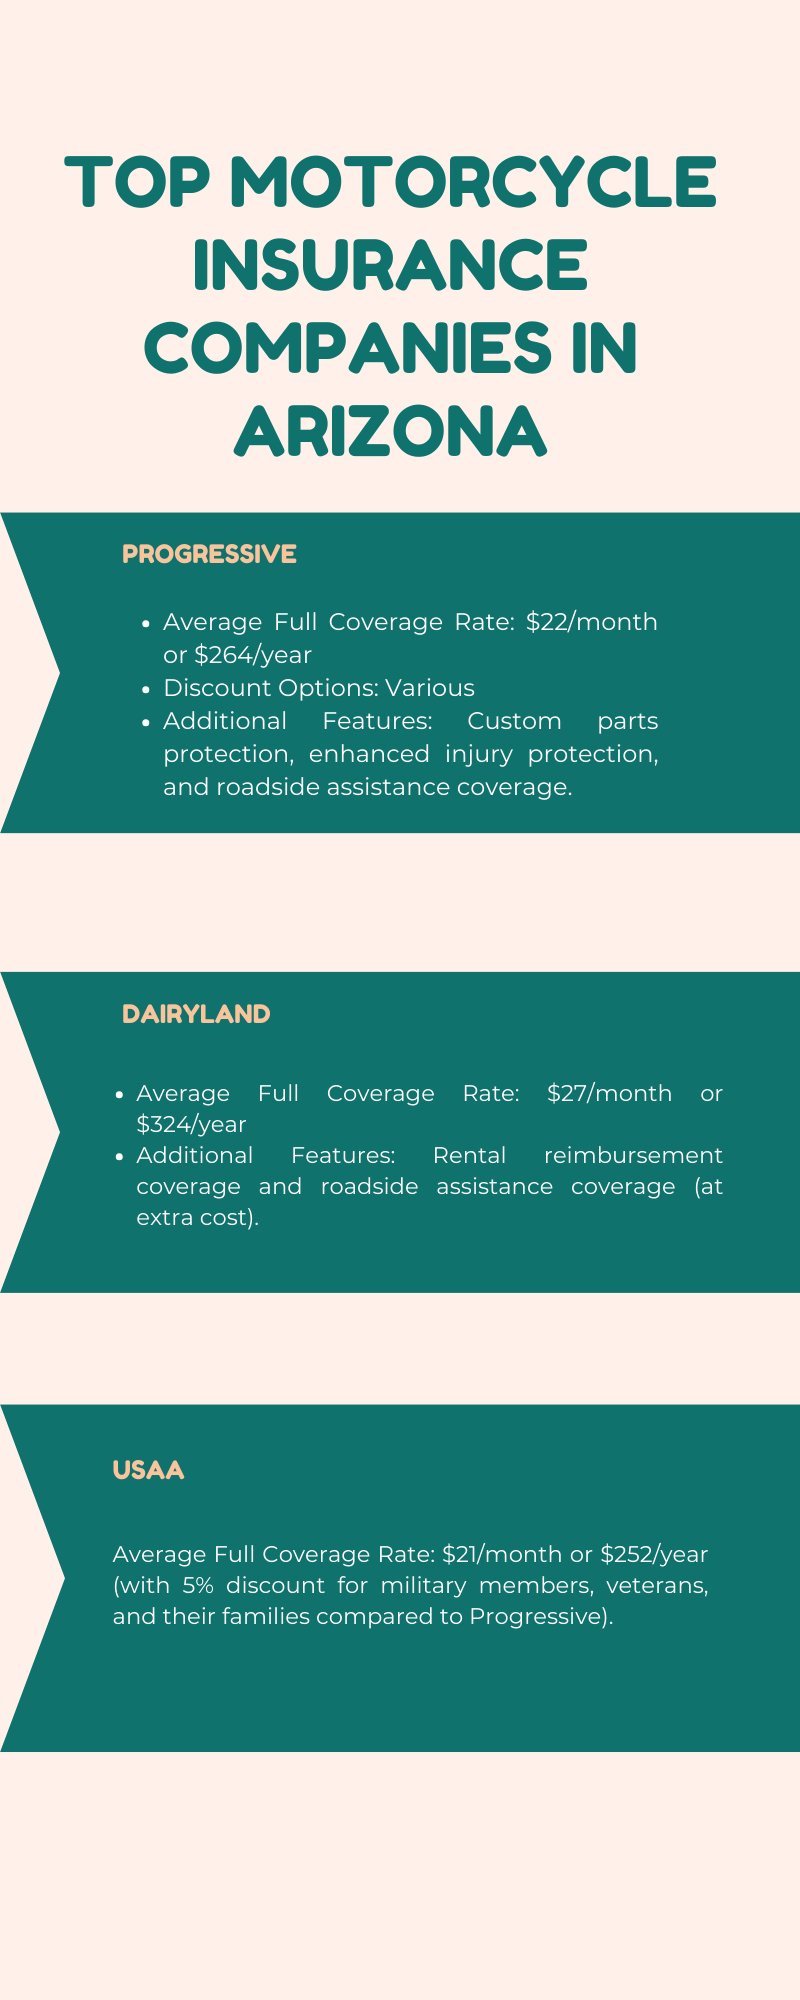 An infographic illustration of 
Top Motorcycle Insurance Companies in Arizona